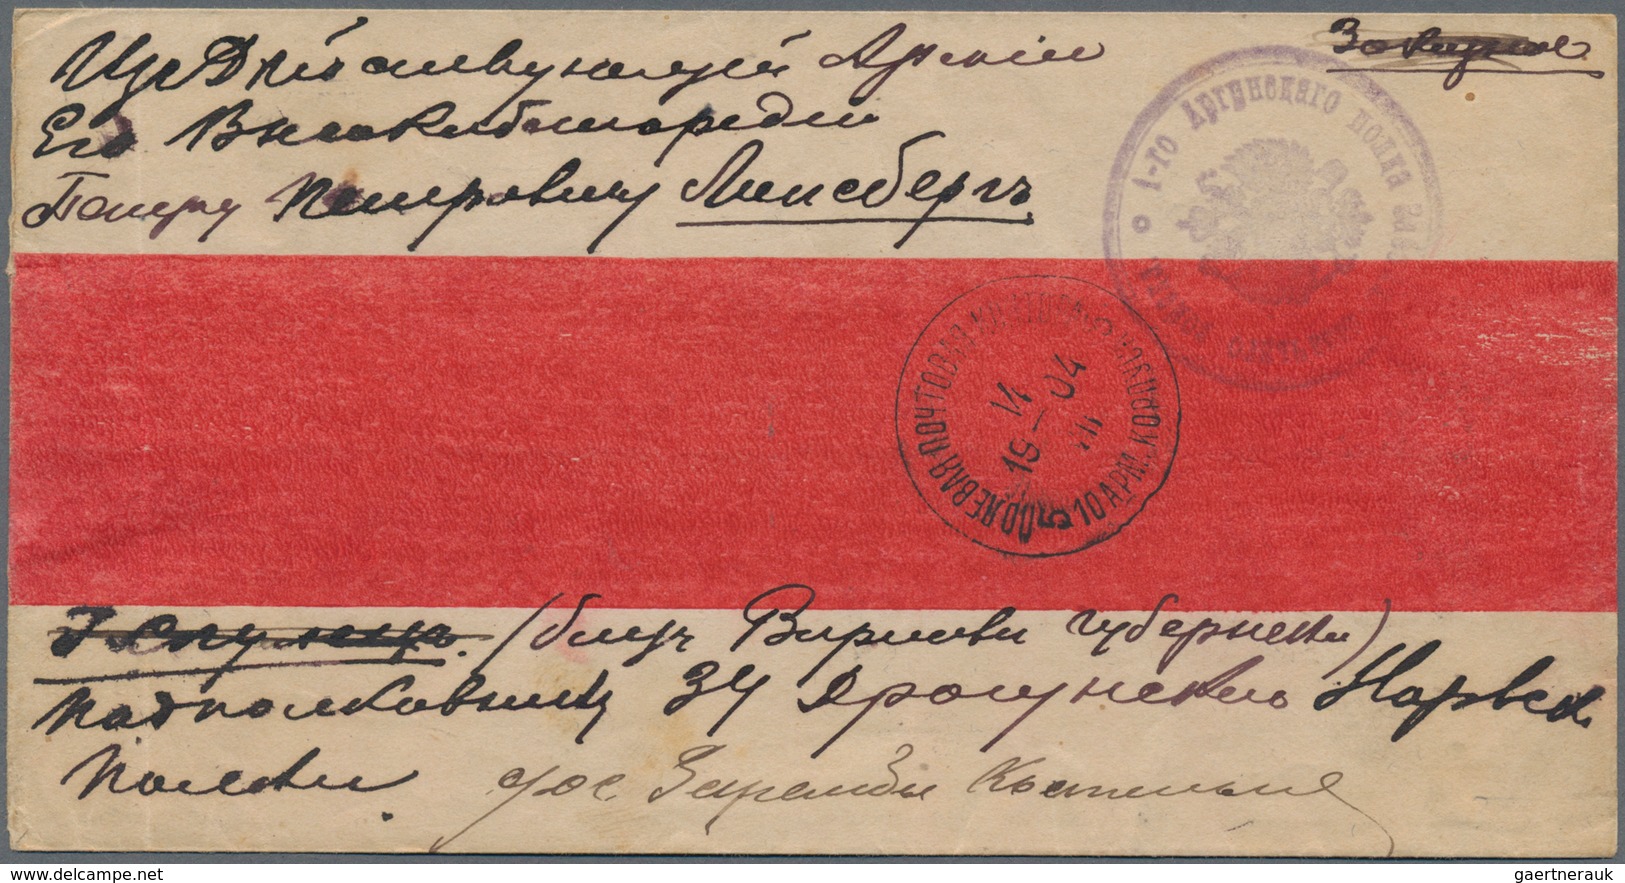 Russische Post In China: 14.07.1904 Russo-Japanese War Red-band Cover From FPO/5/10th ARMY CORPS Wit - China